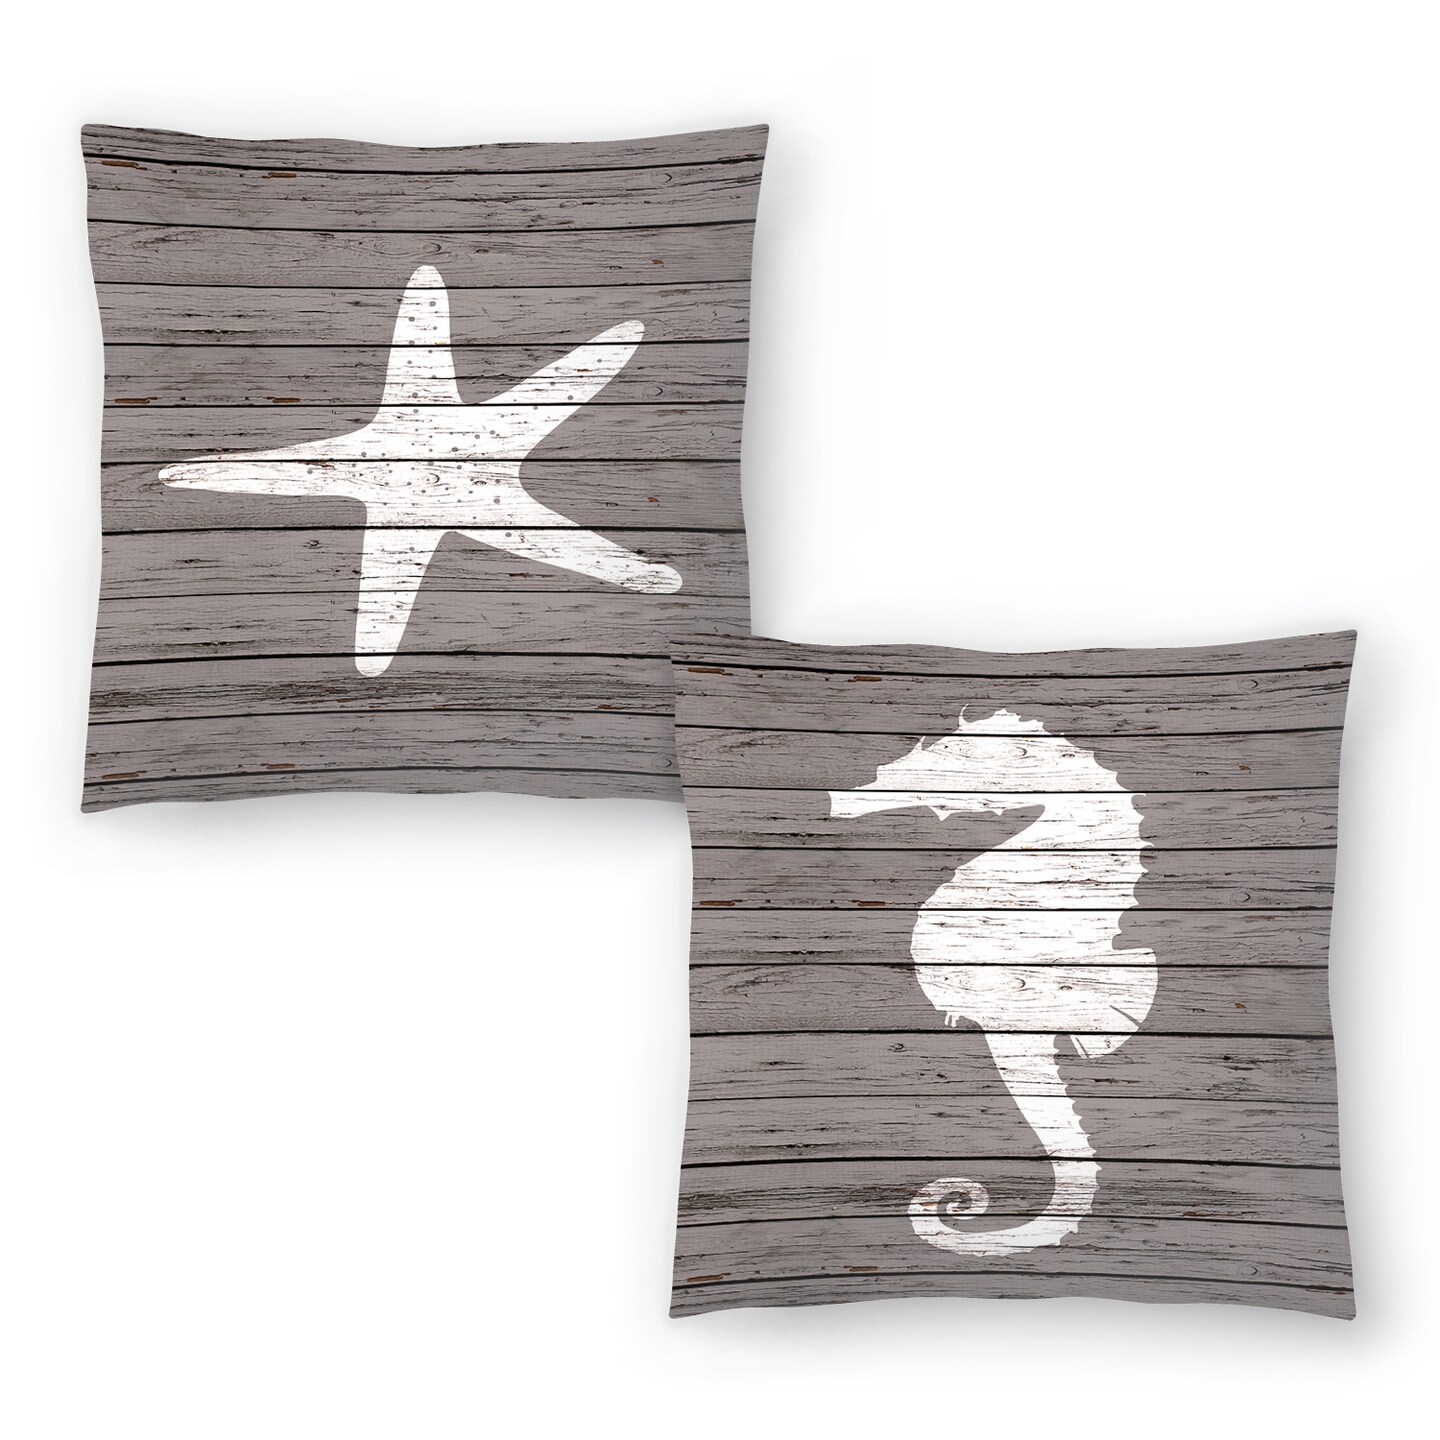 Wood Quad Seahorse and Wood Quad Starfish by Samantha Ranlet Set of 2 Throw Pillows Americanflat